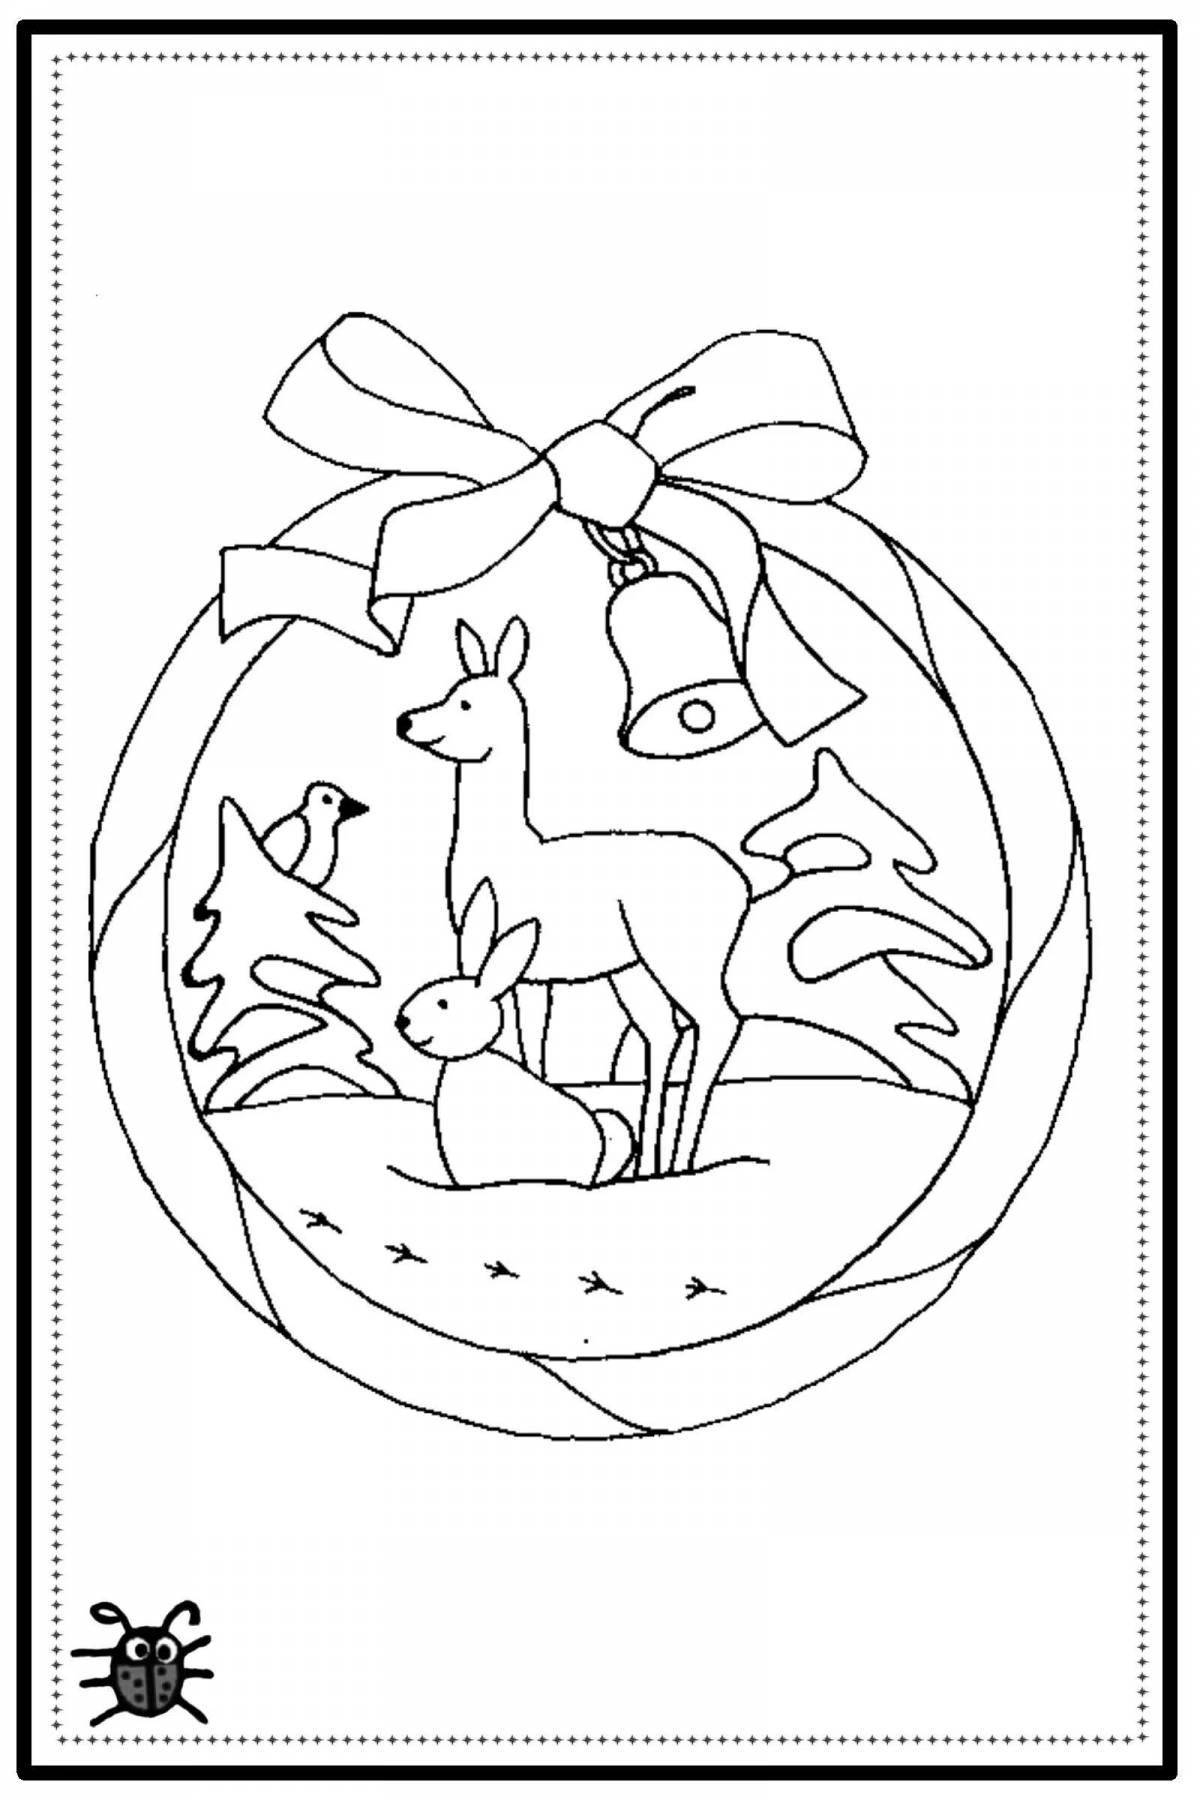 Live Christmas coloring book for 3-4 year olds